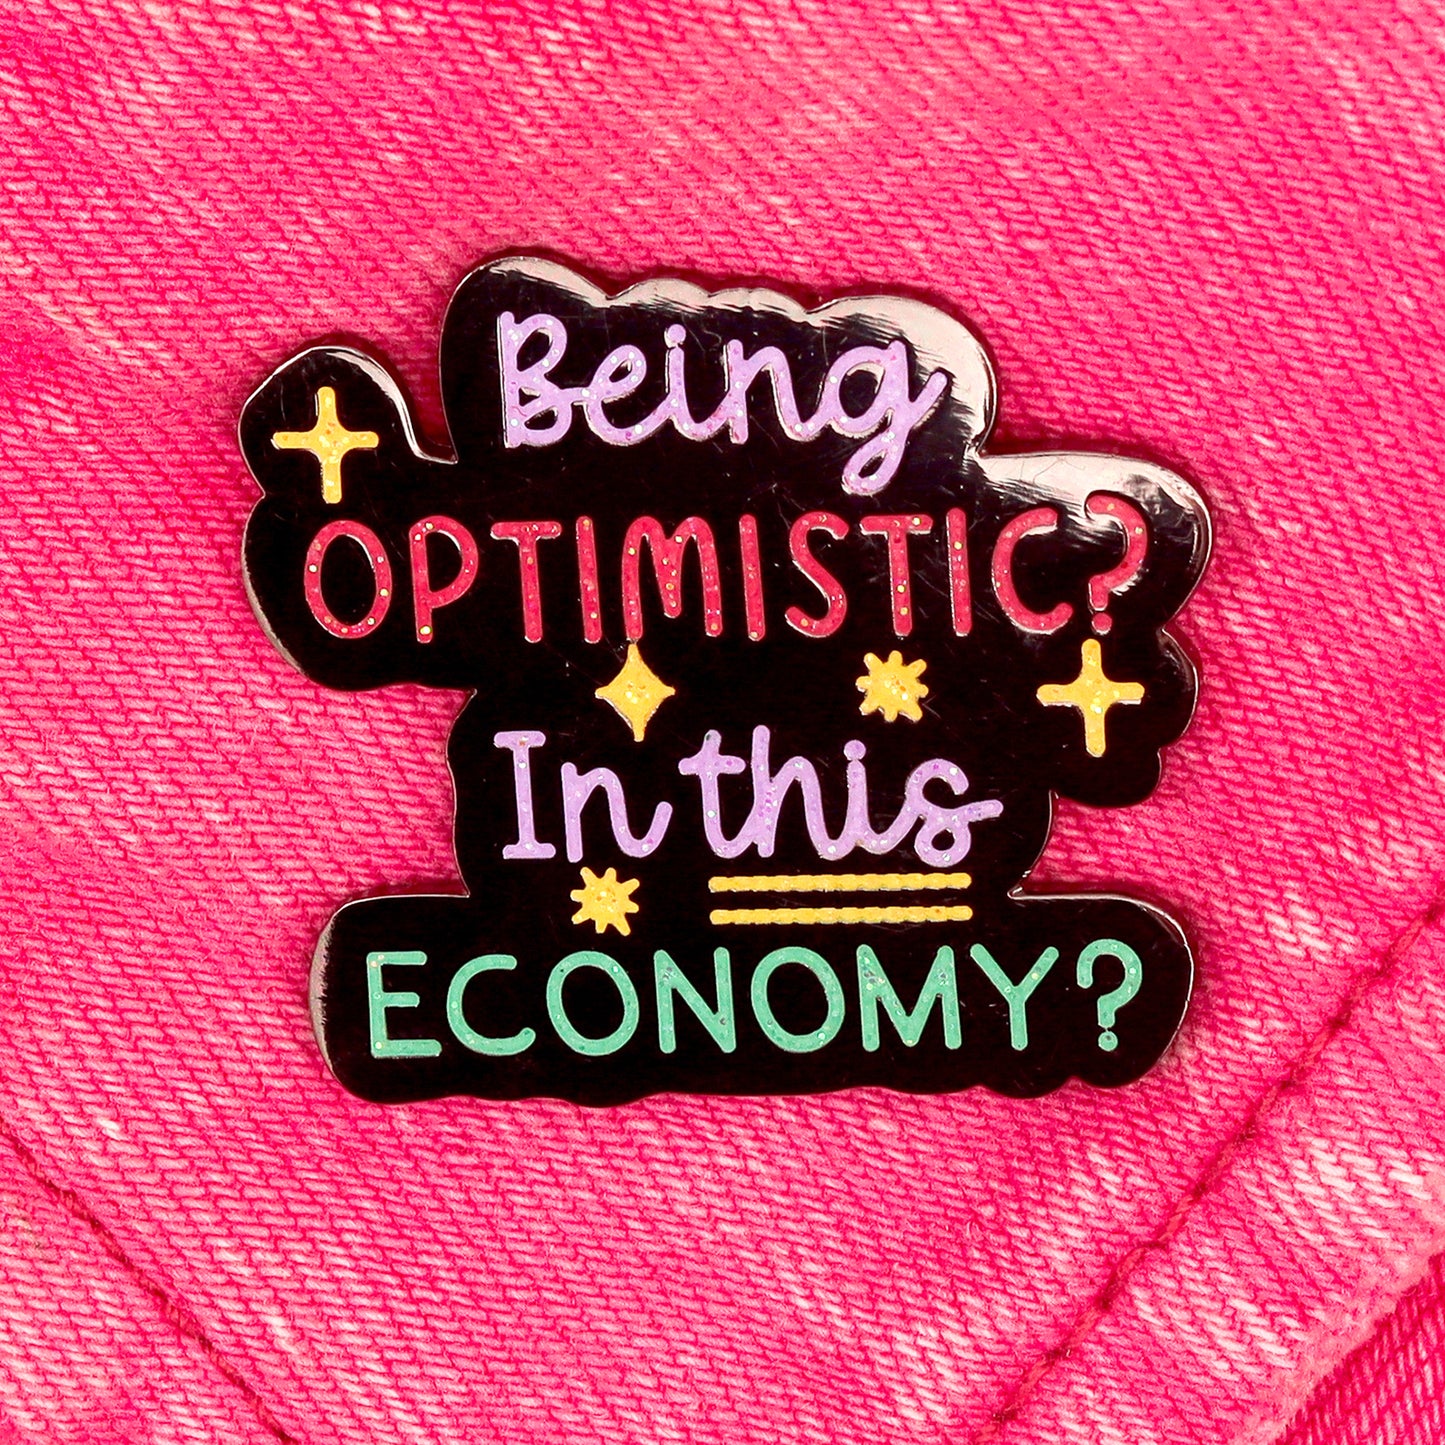 Being Optimistic? In this economy? Enamel pin